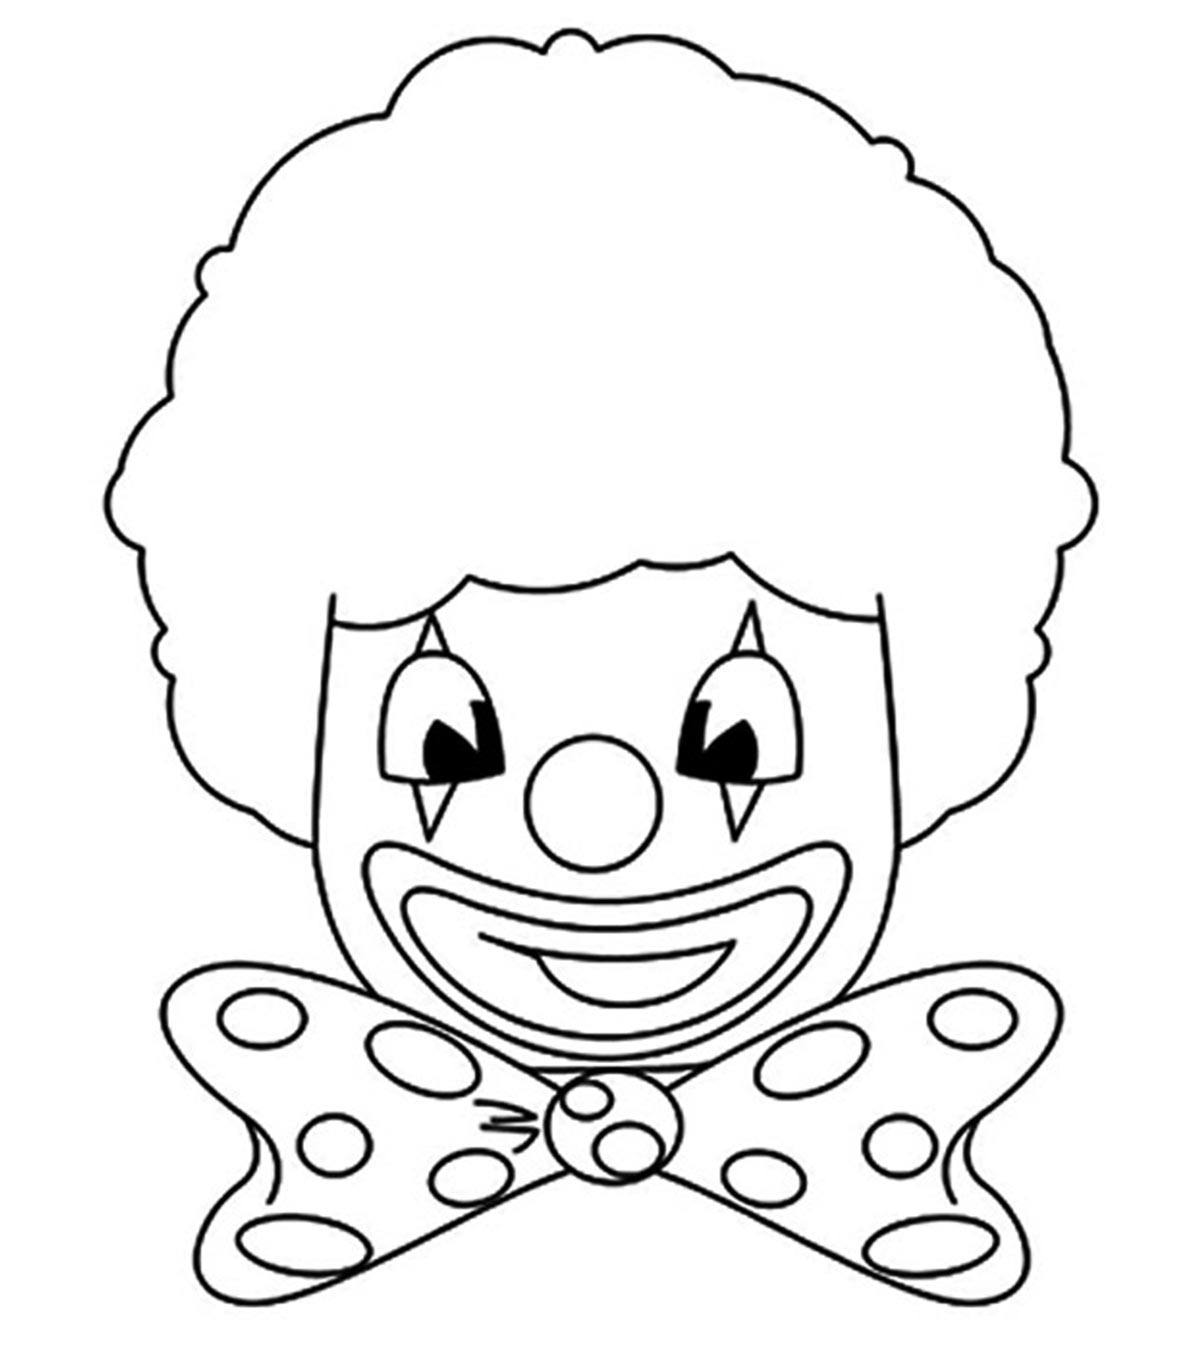 10 Funny Clown Coloring Pages For Your Little Ones_image